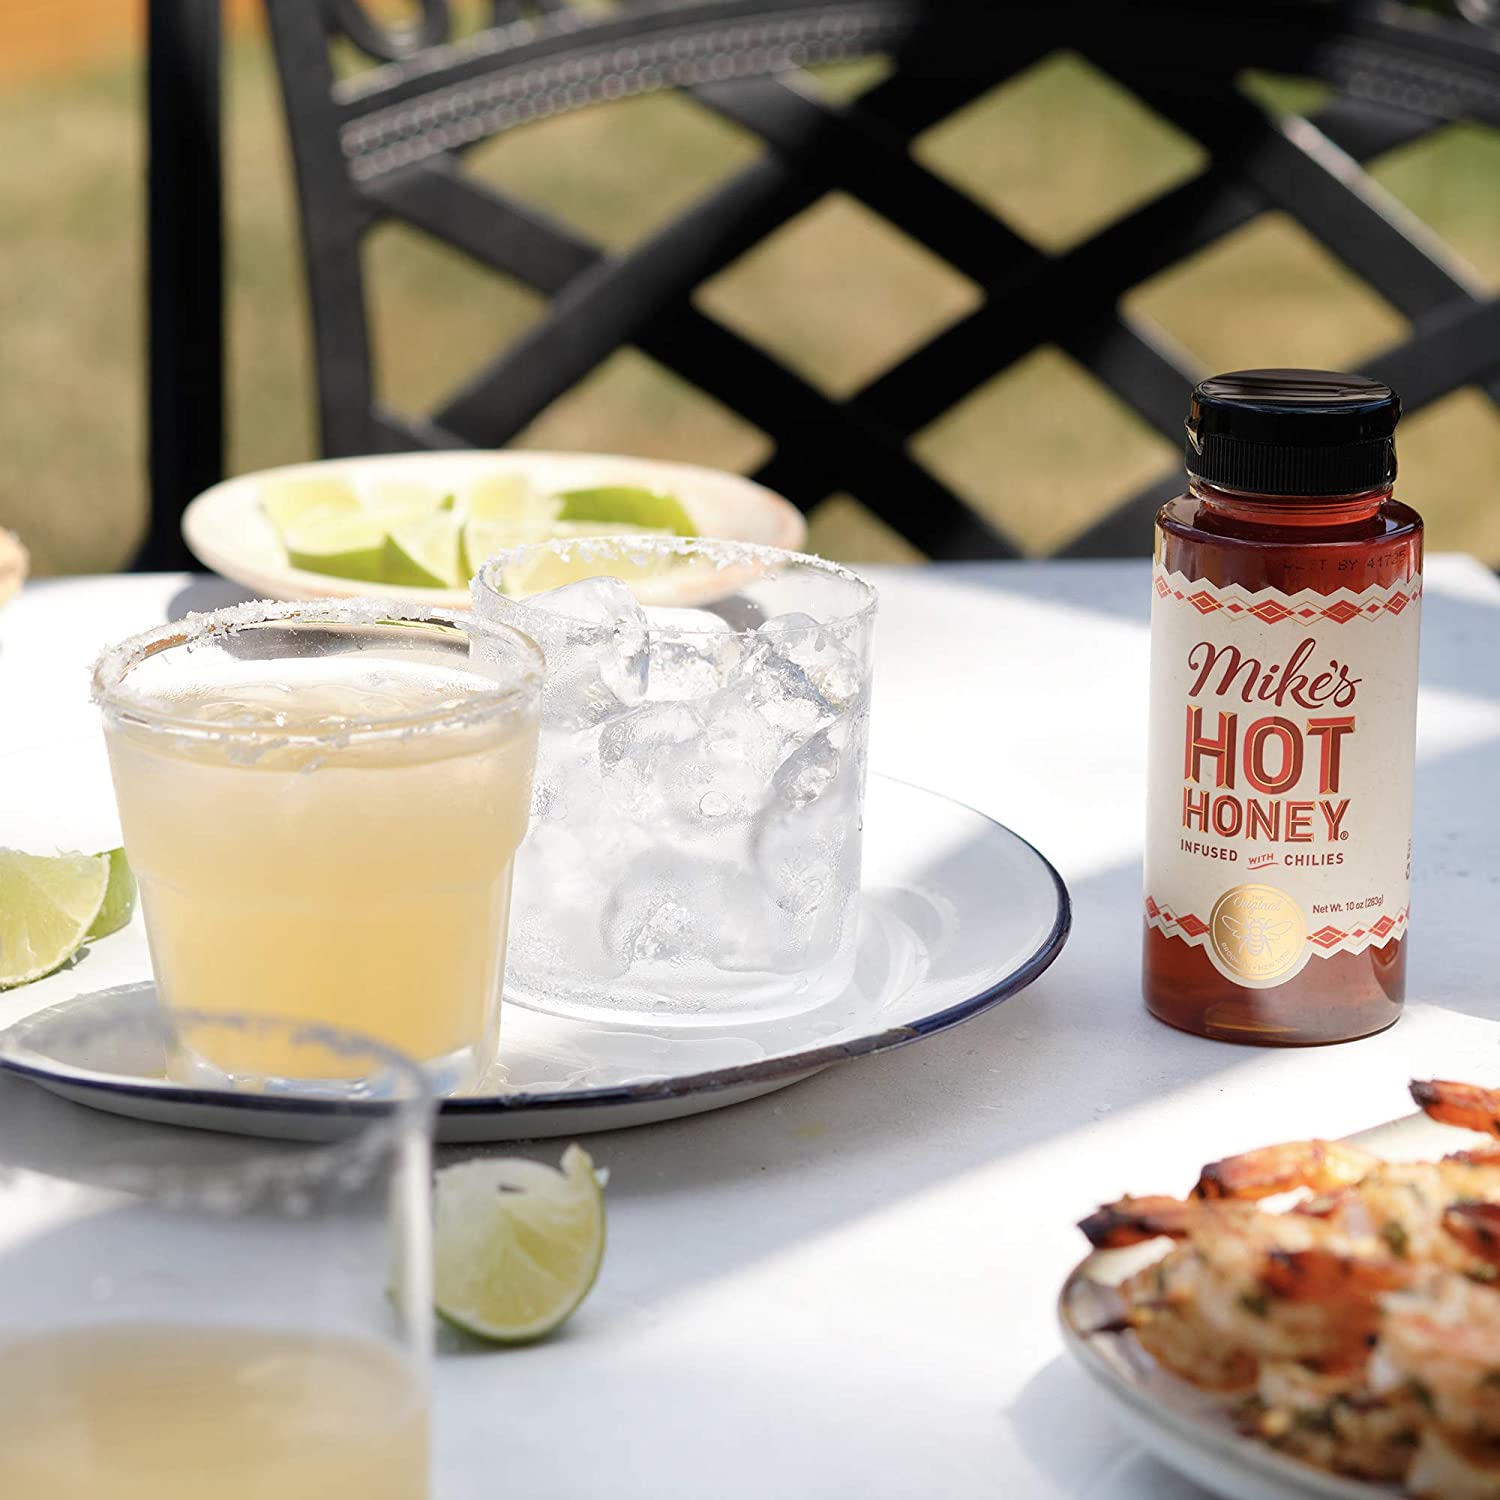 A jar of Mike's hot honey is on a table next to a plate which has two cocktails on it.